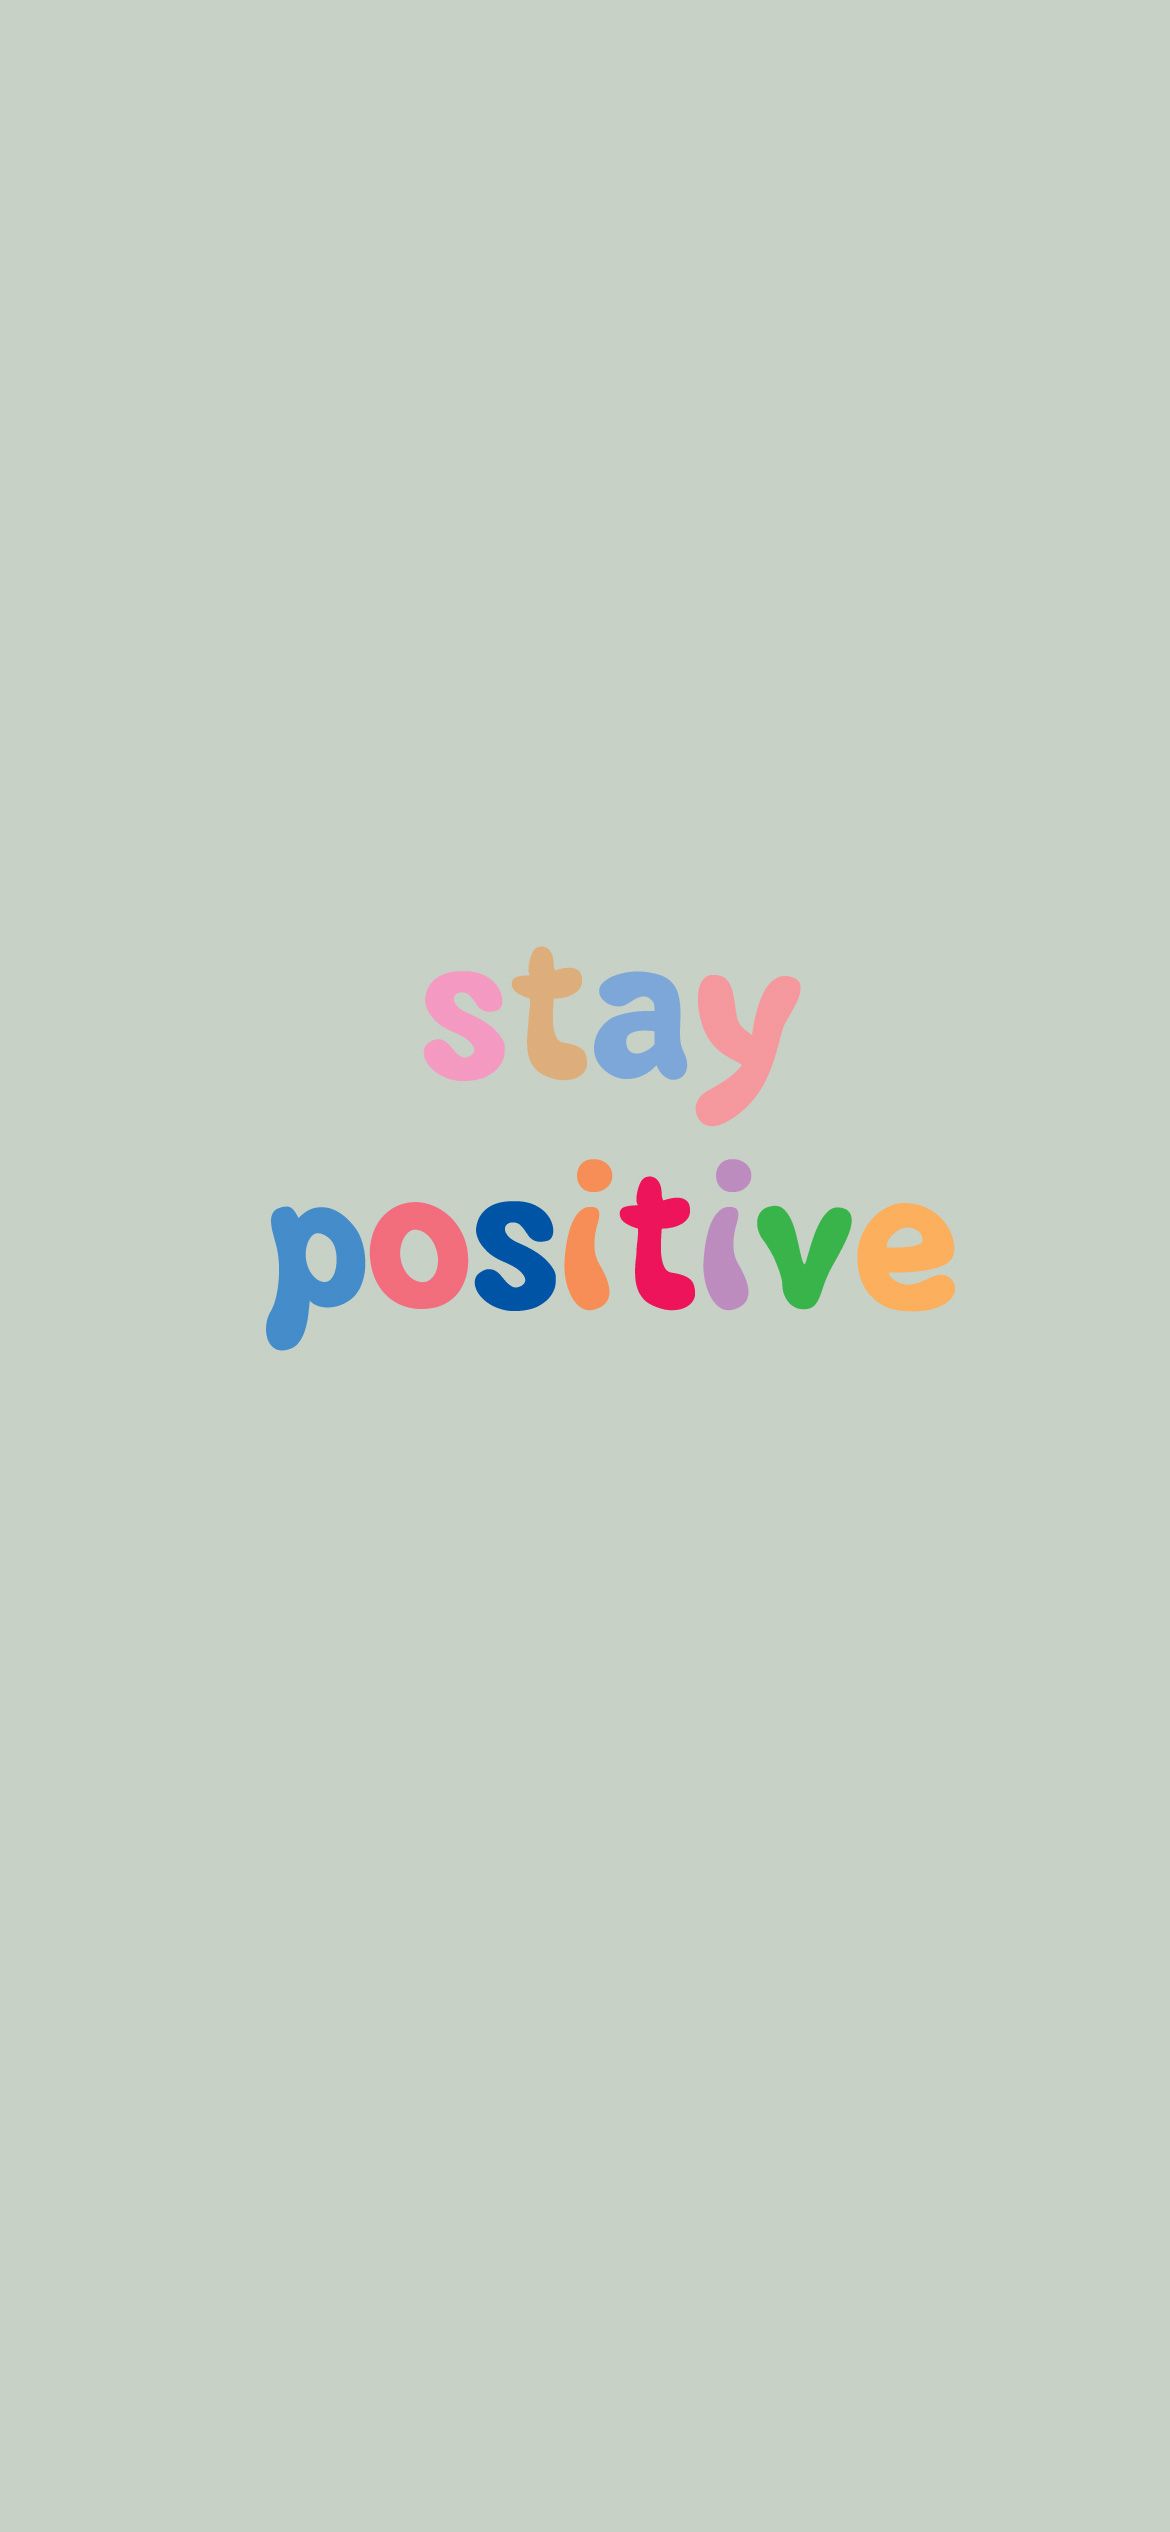 Stay positive wallpaper by jessica lynn - Quotes, soft green